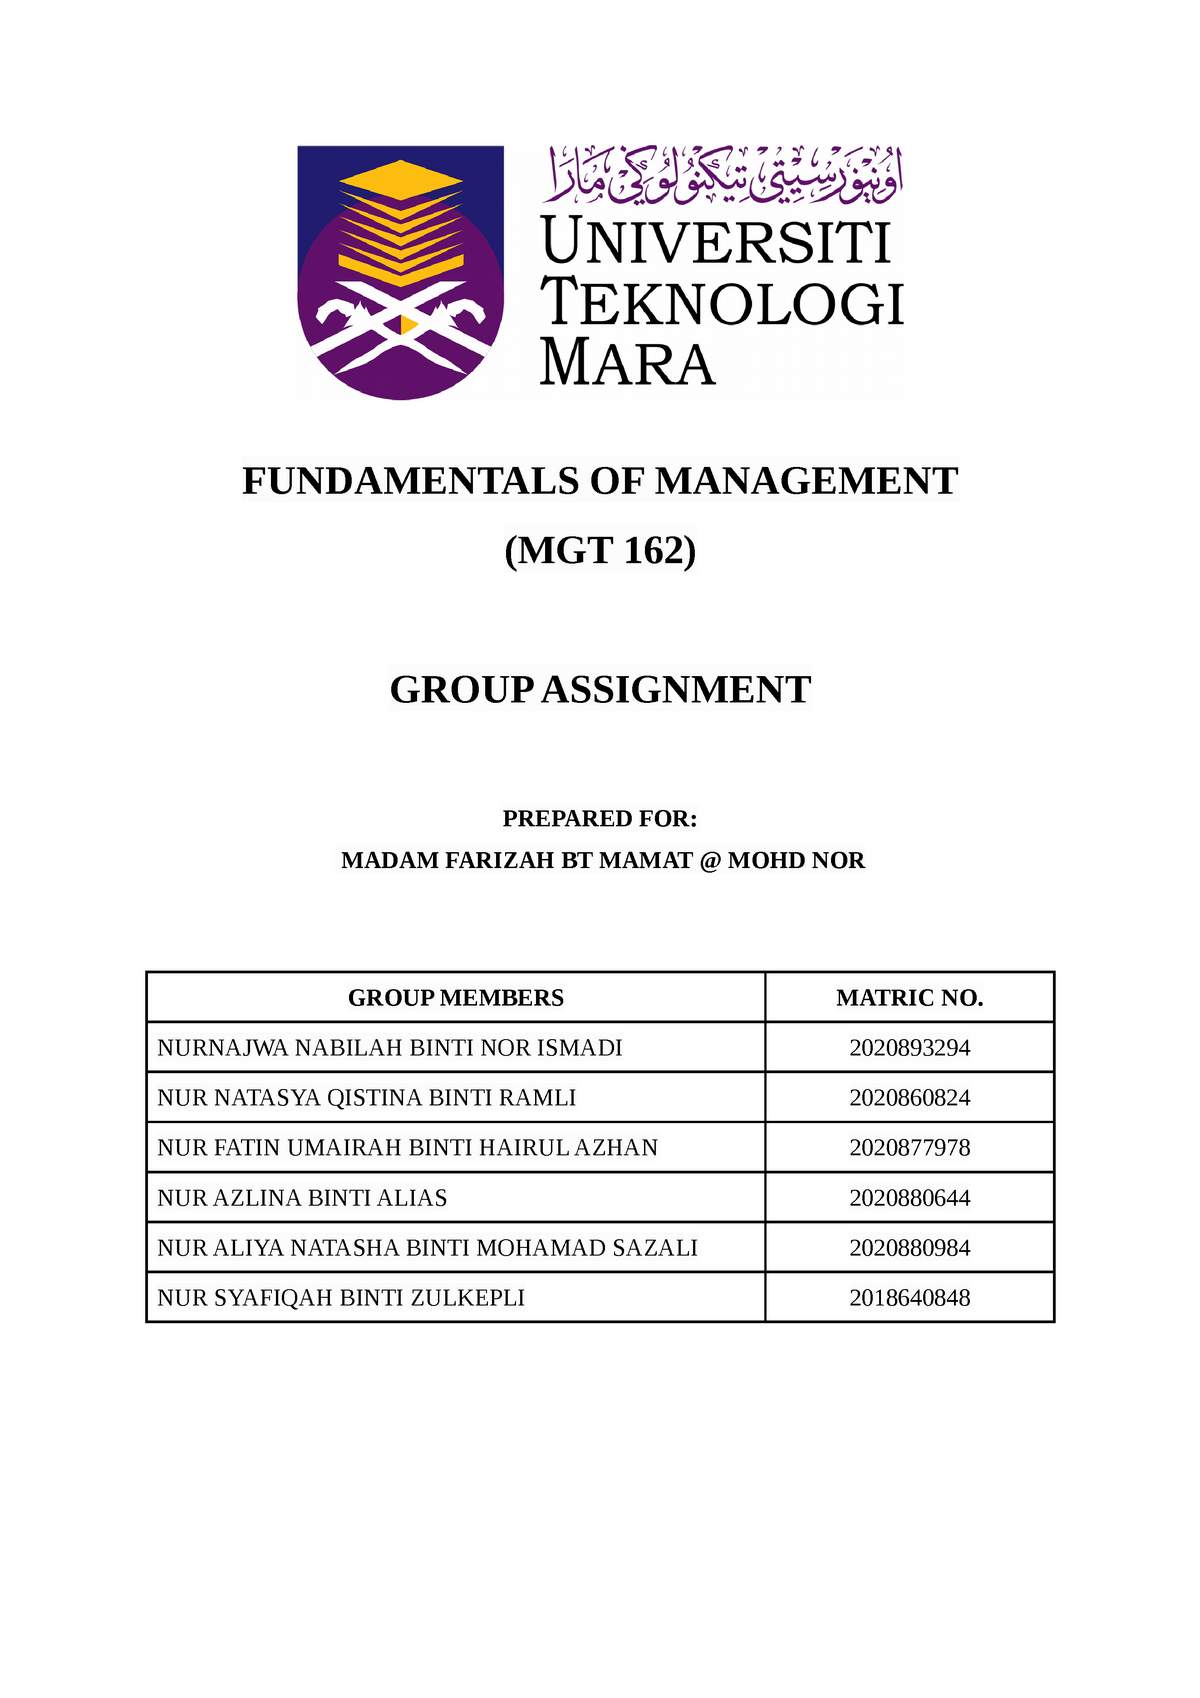 group assignment mgt 162